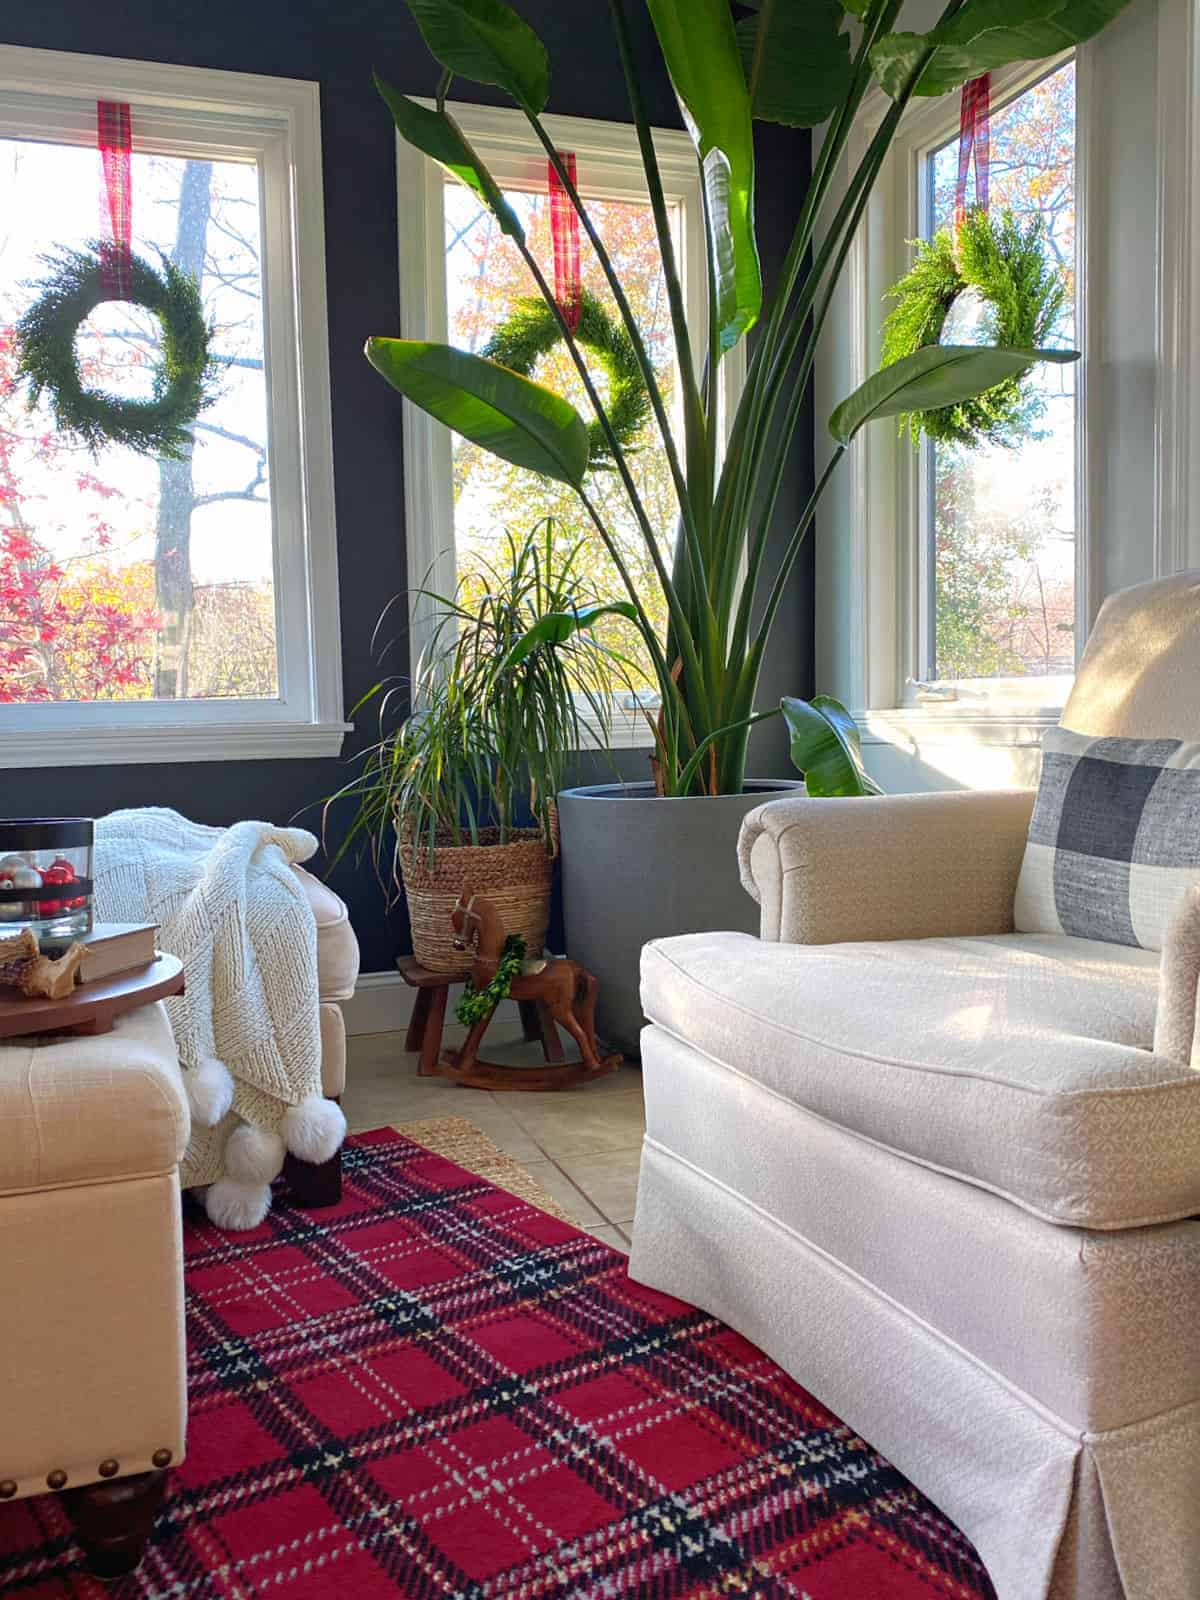 plants in the corner of a sunroom with wreaths on the windows